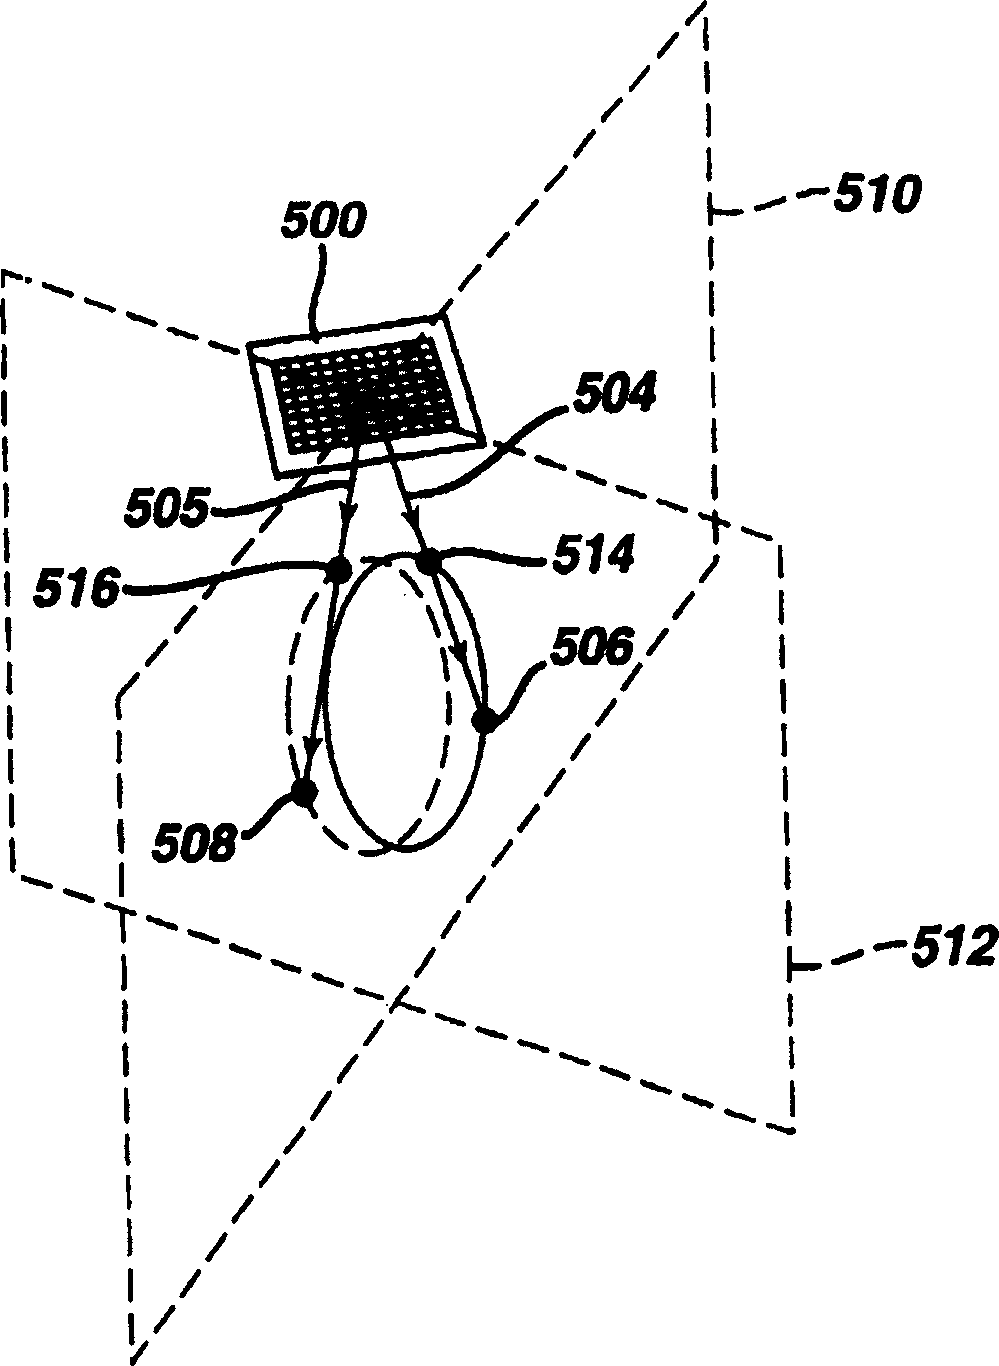 Biplane ultrasonic imaging with icon depicting the mutual plane orientation